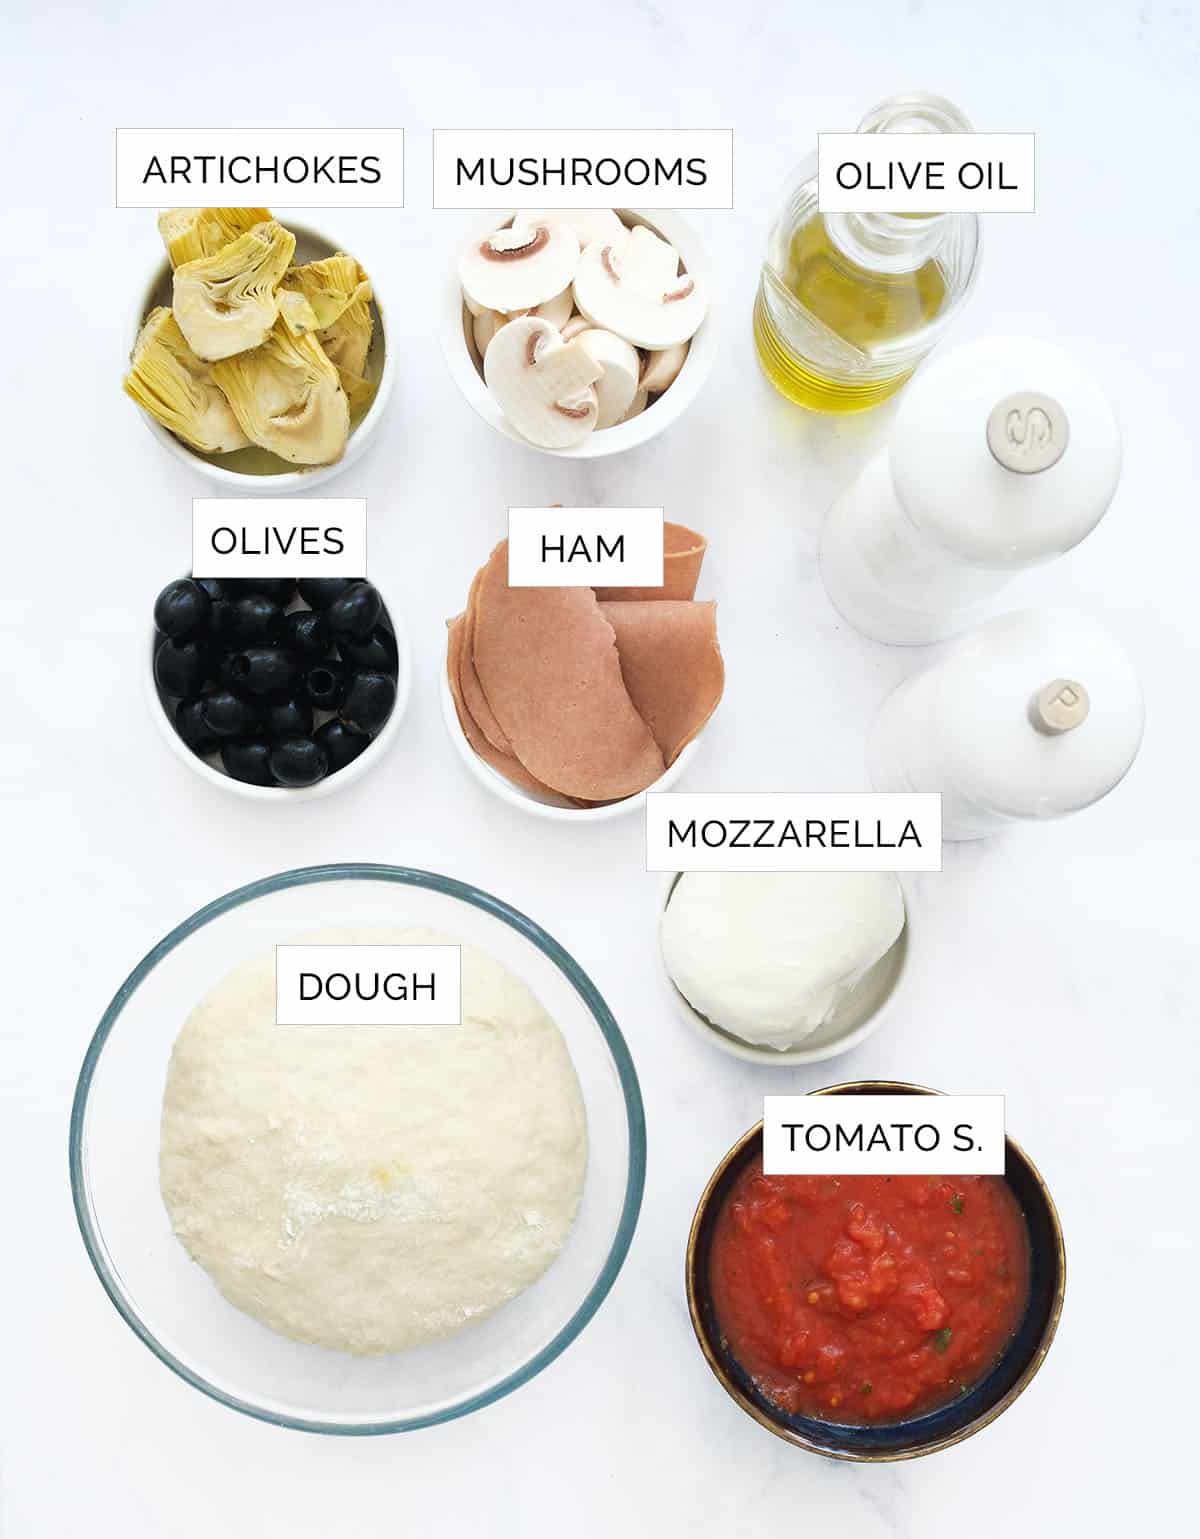 The ingredients to make the capricciosa pizza are arranged over a white background.